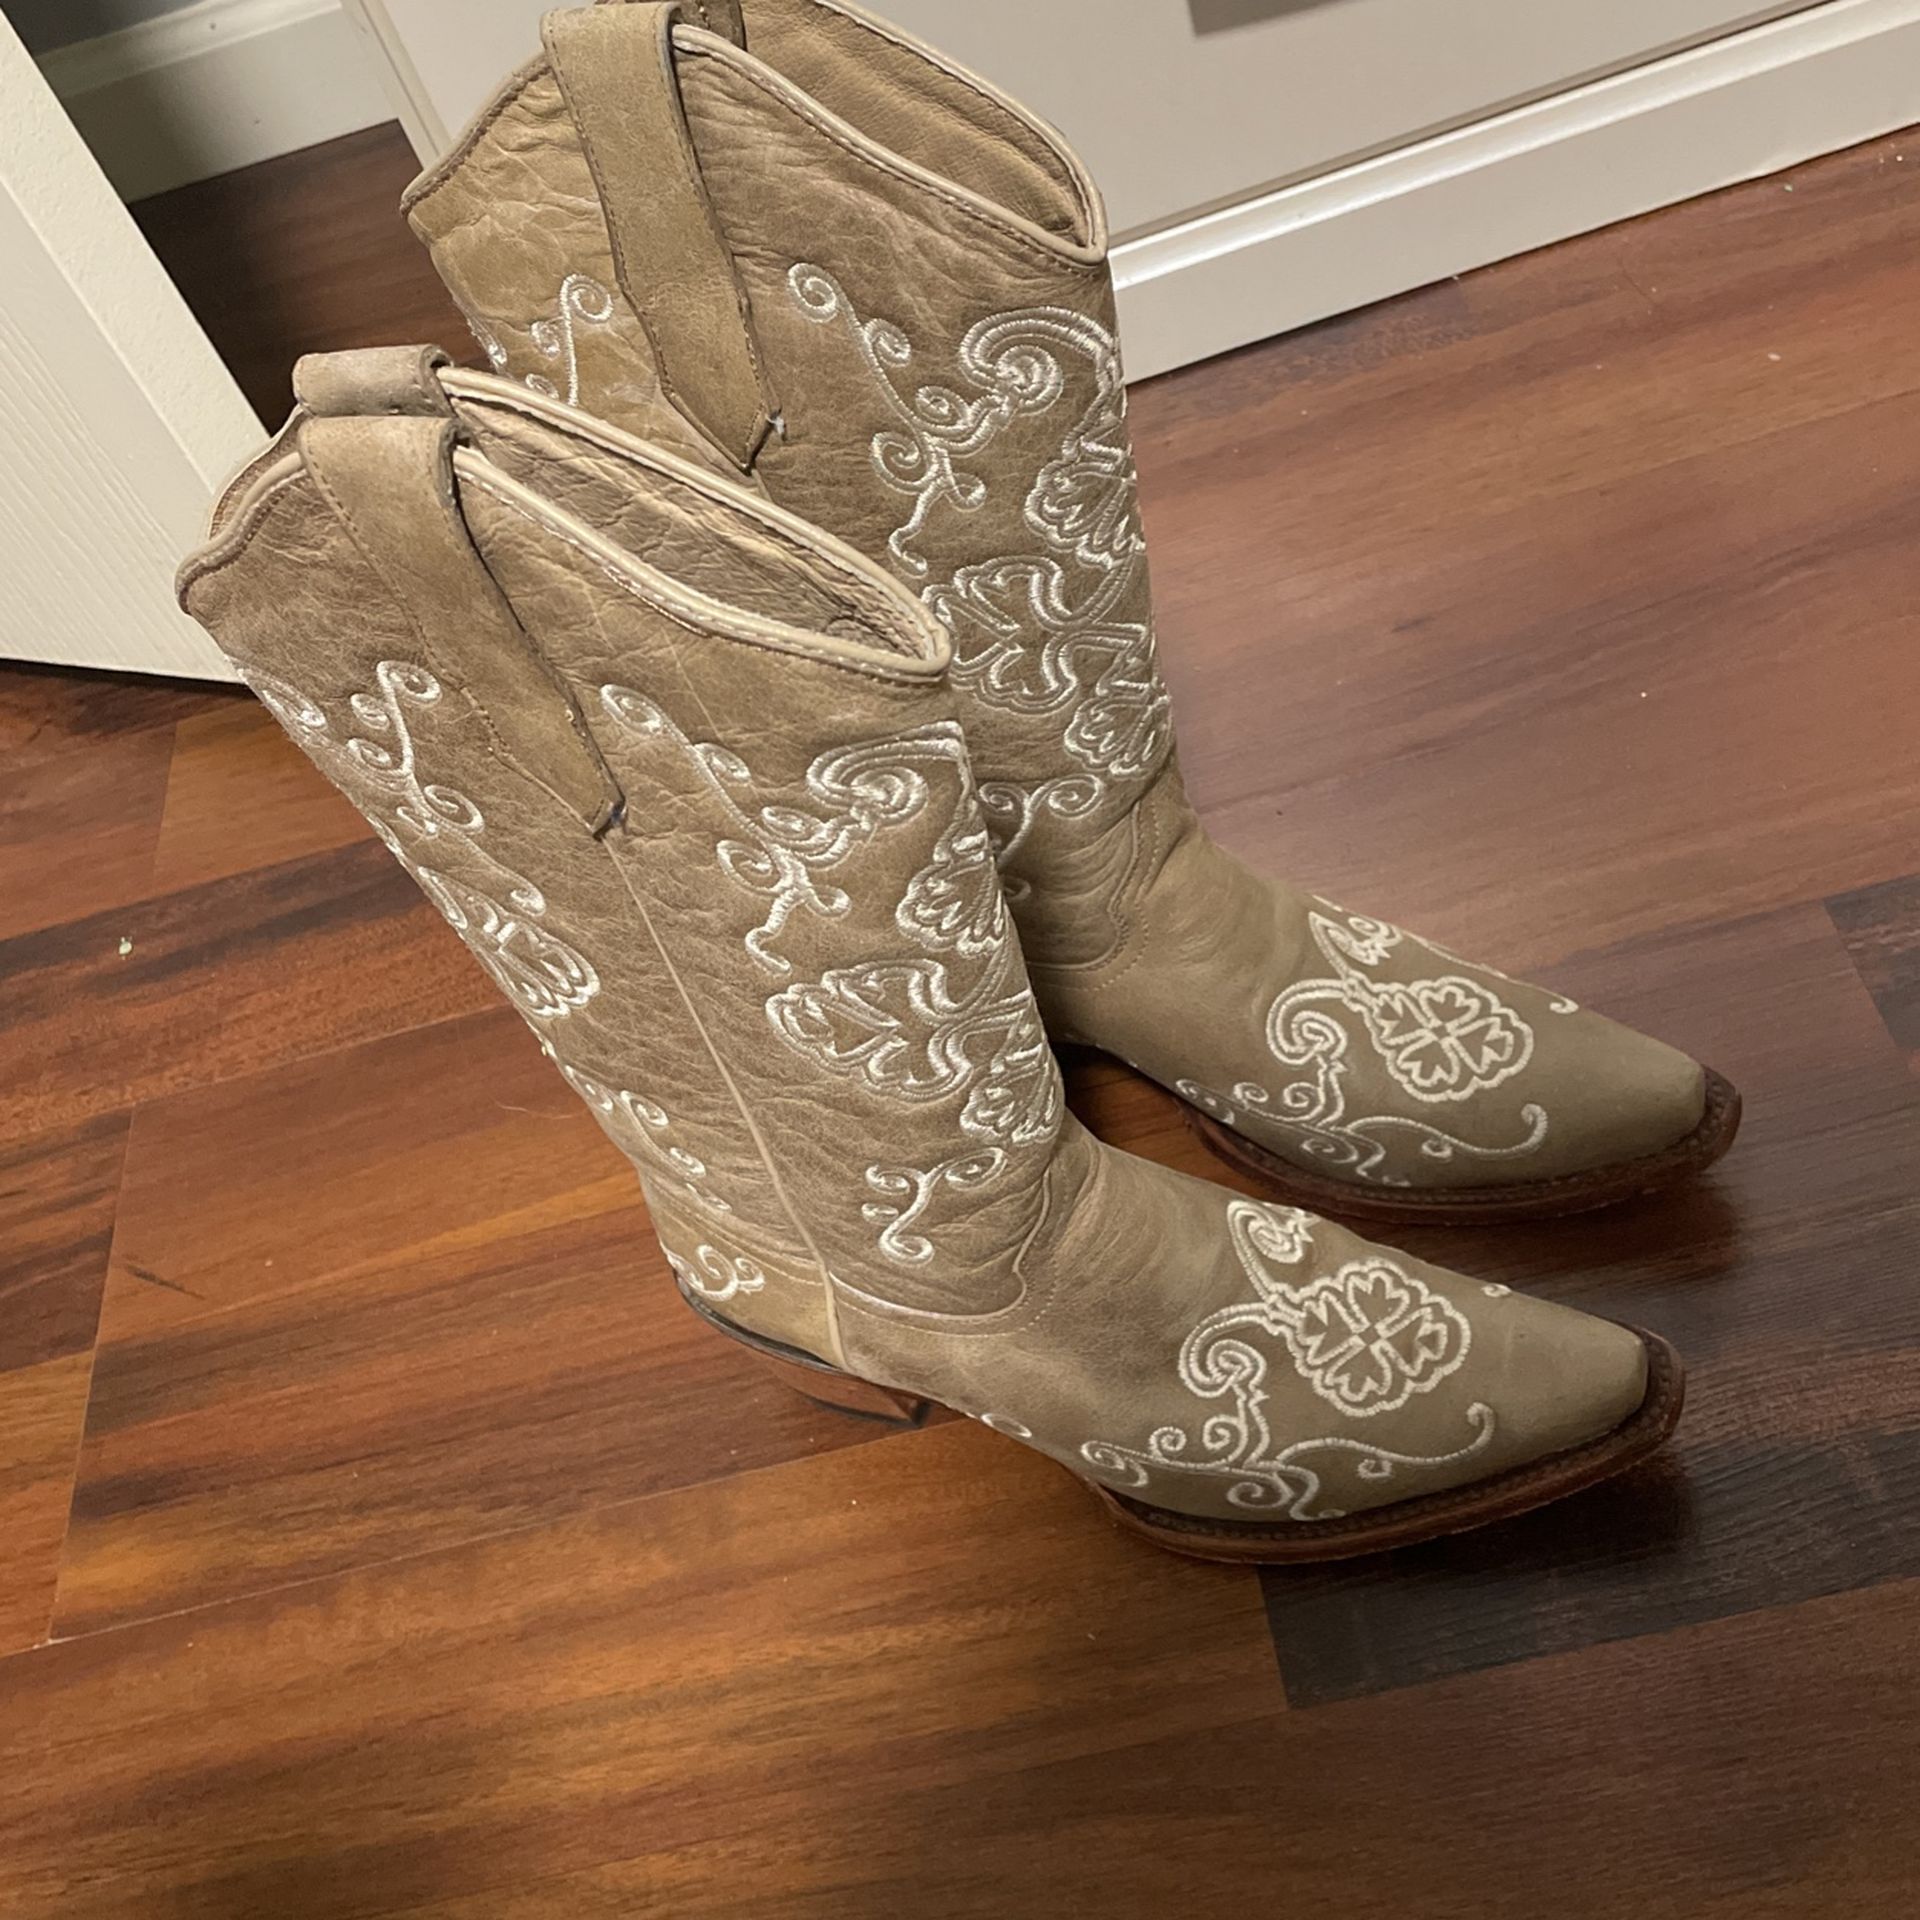 Womens Cowboys Boots Size Circle G Brand Only One Time Wear Have Box Botas De Mujer Size 8 Marca Circle G De Canvenders Sola Una Vez Usado Tengo Caja 